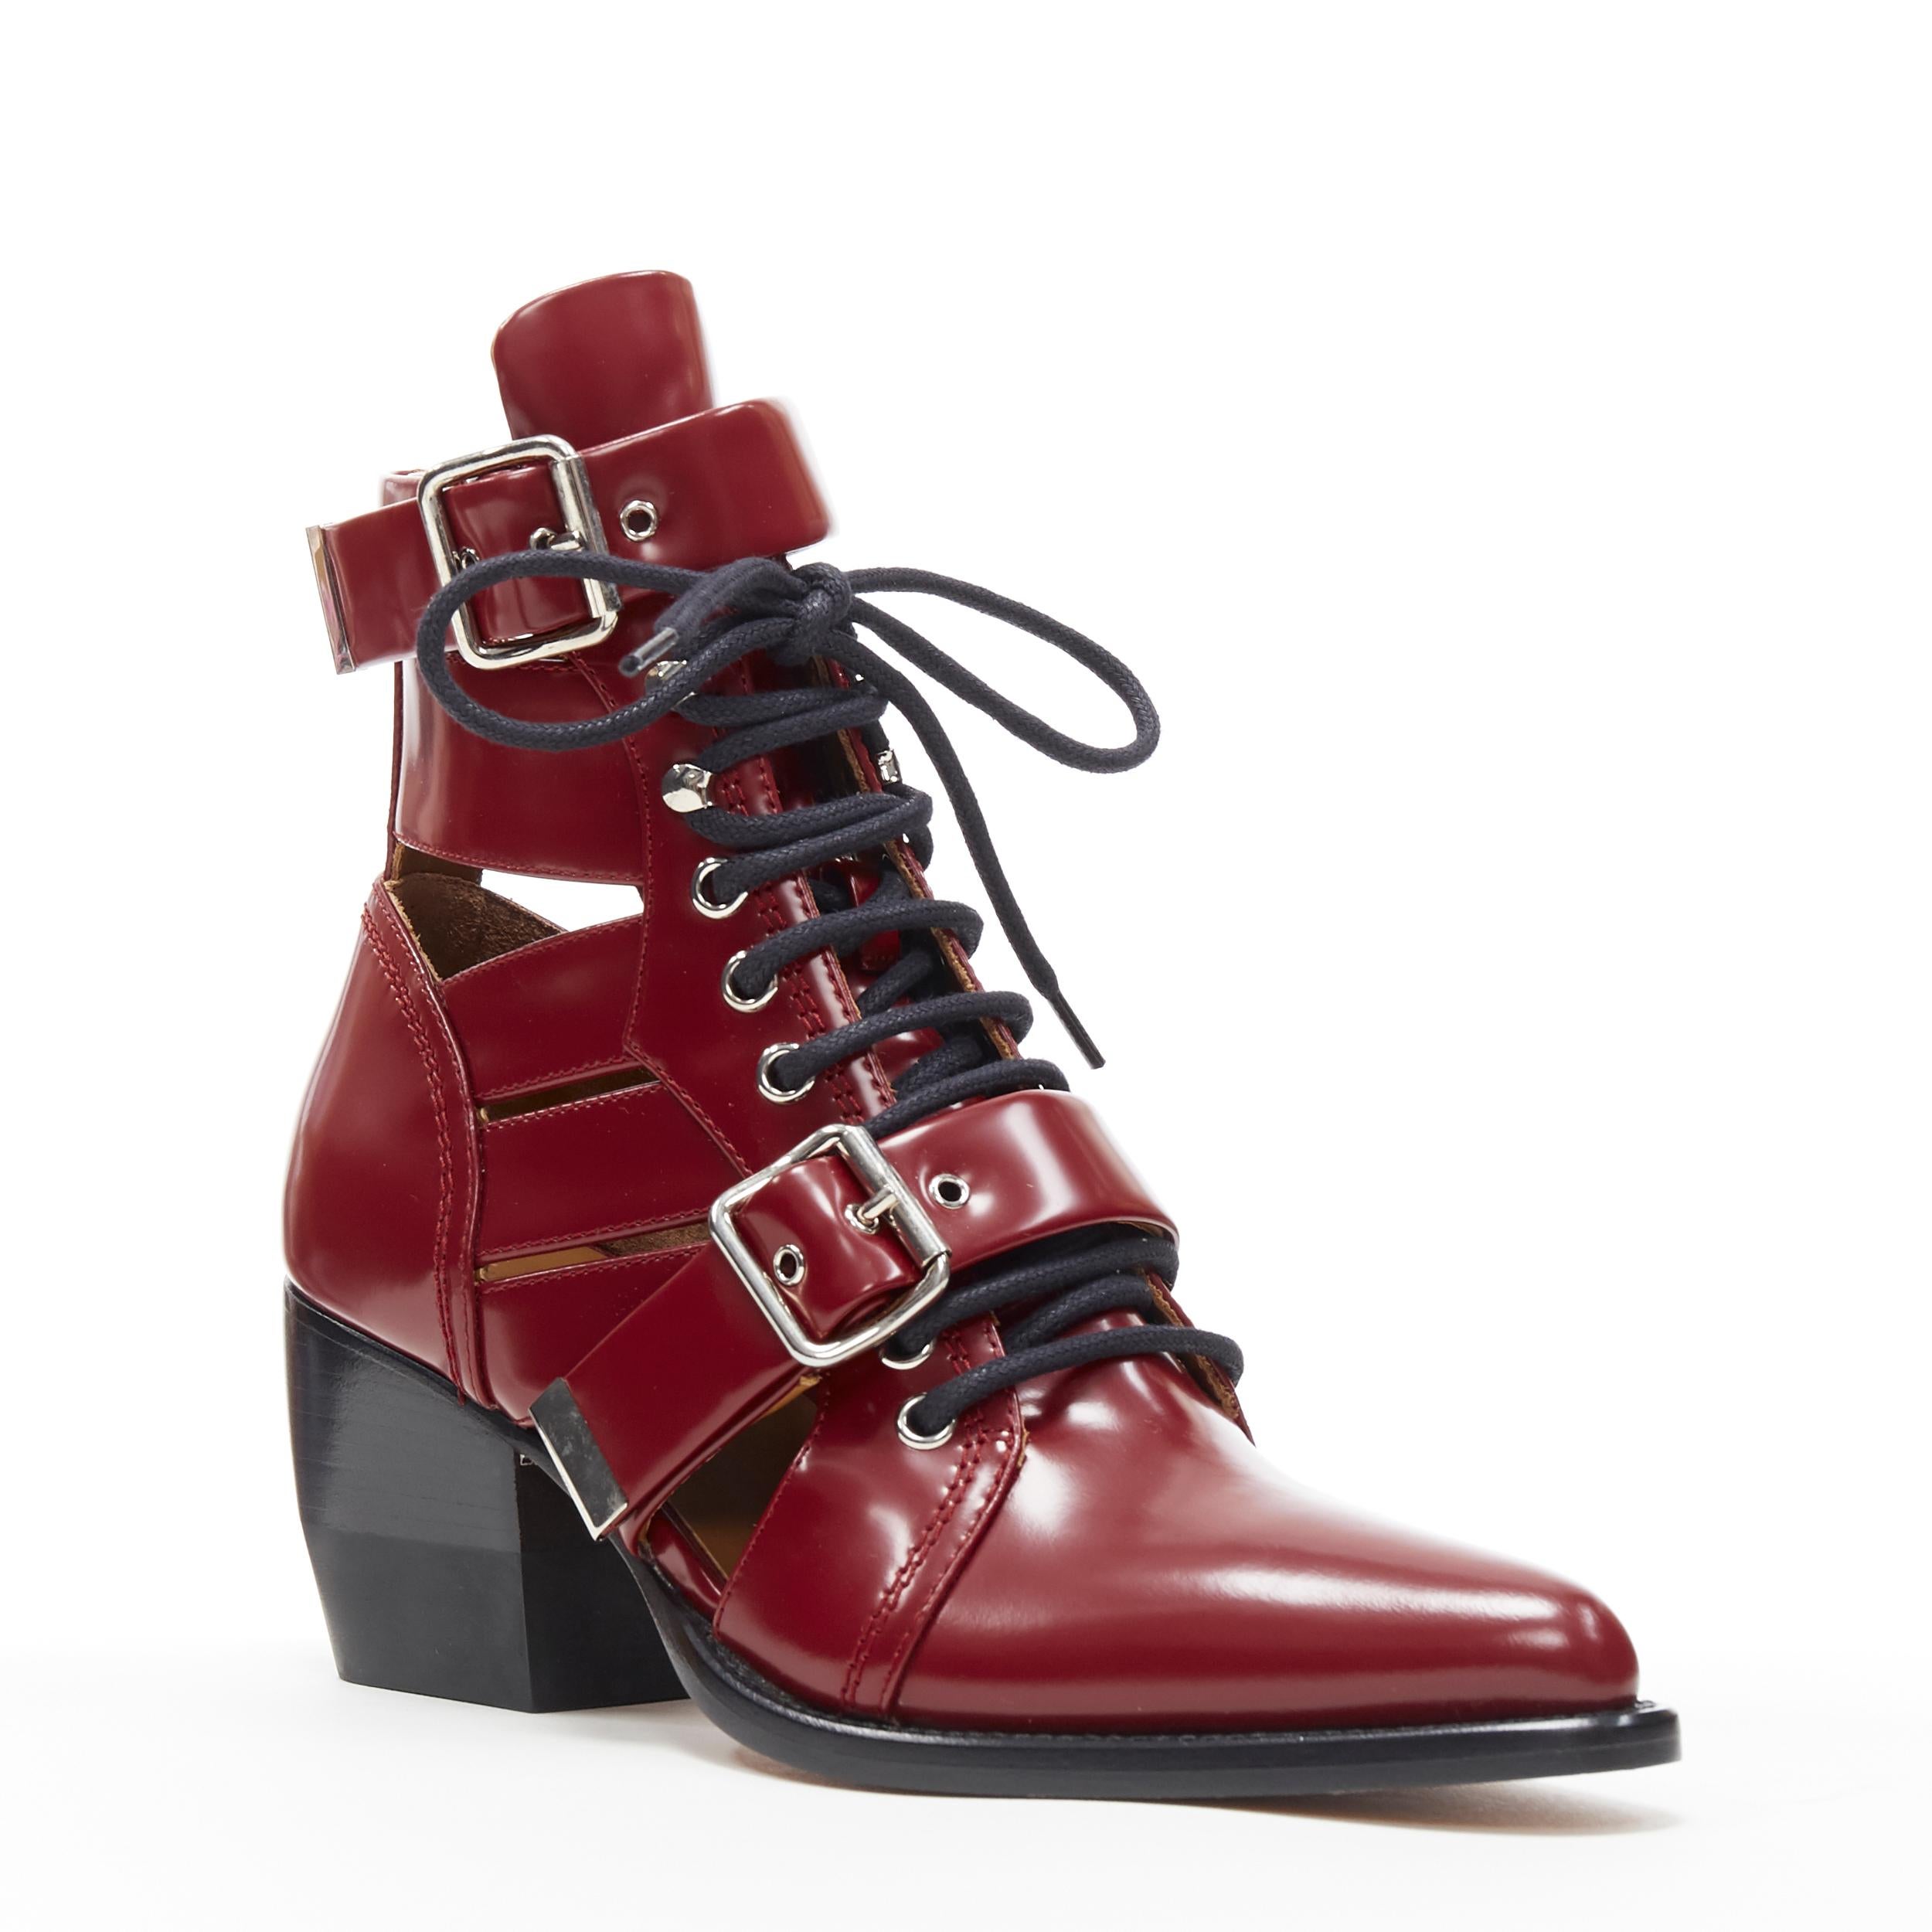 new CHLOE Rylee burgundy red leather cut out buckled pointy ankle boot EU39
Brand: Chloe
Model Name / Style: Rylee
Material: Leather
Color: Burgundy
Pattern: Solid
Closure: Lace up
Extra Detail: Signature Rylee boots by Chloe. Runway style. Ankle